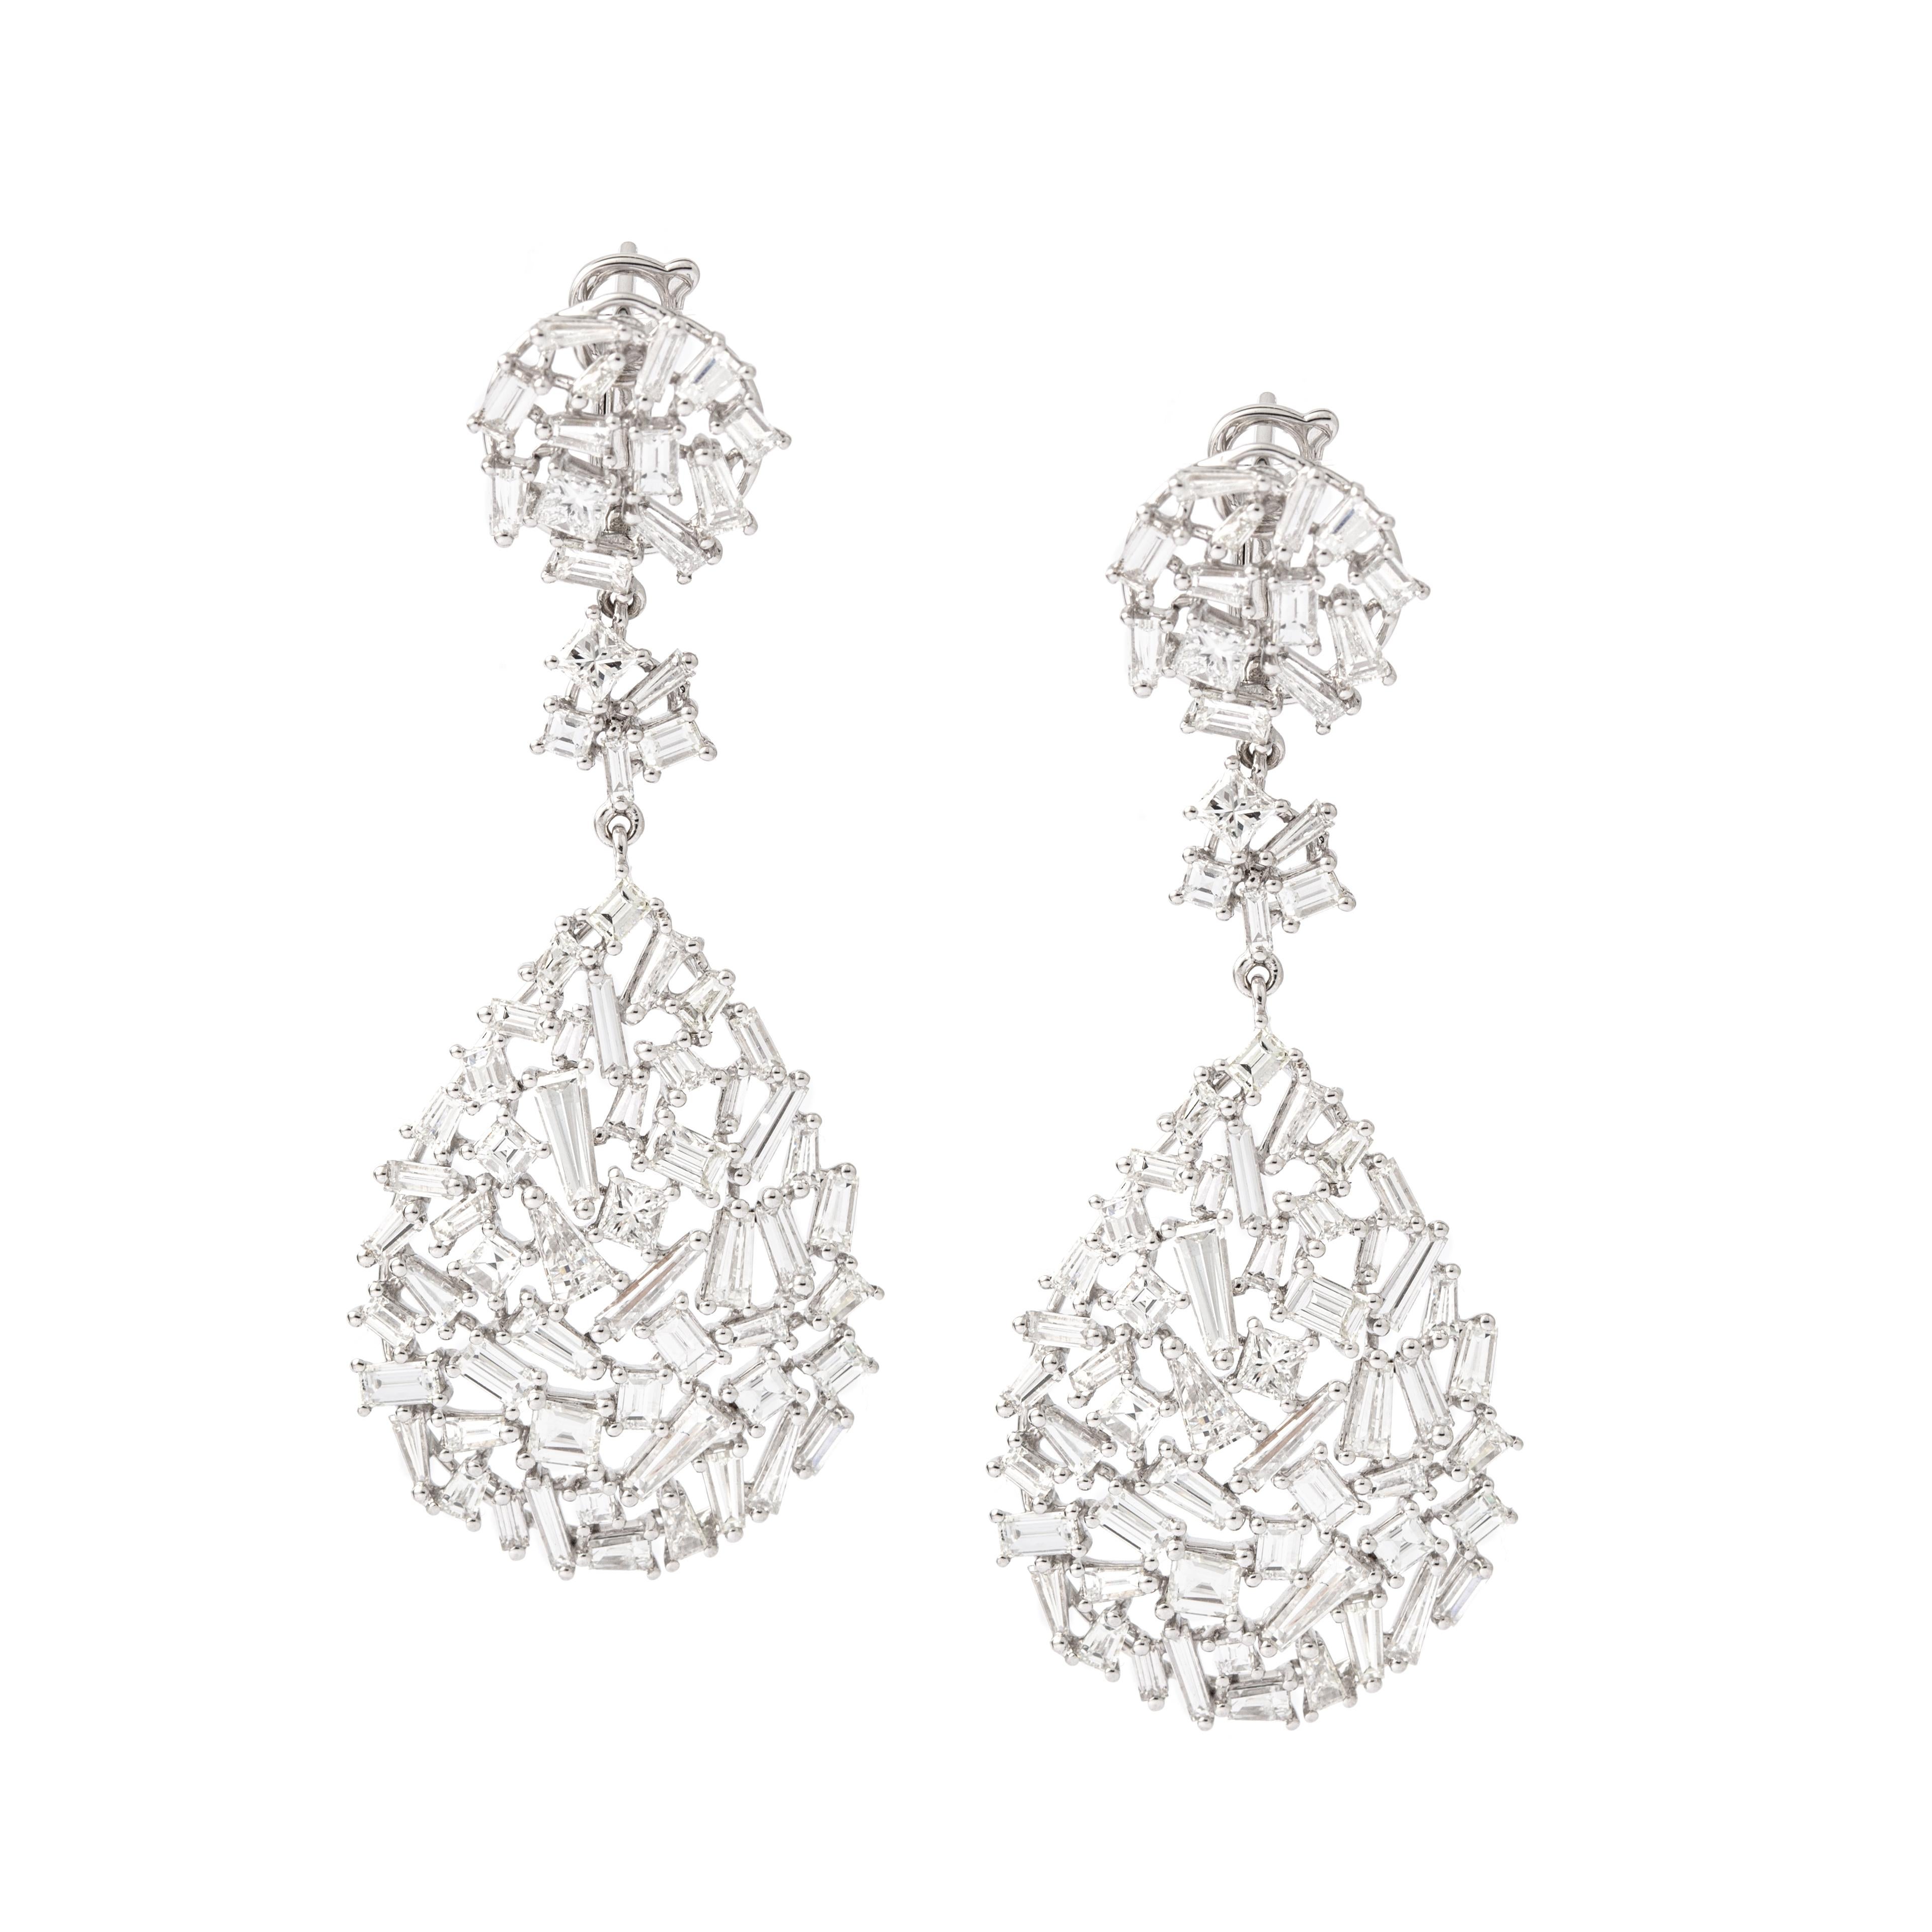 Earrings in 18kt white gold set with 139 baguette, princess, tapers cut diamonds 7.32 cts.

Length: 5.00 centimeters (1.97 inches).

Maximum Width: 2.00 centimeters (0.79 inches).

Total weight: 11.29 grams.